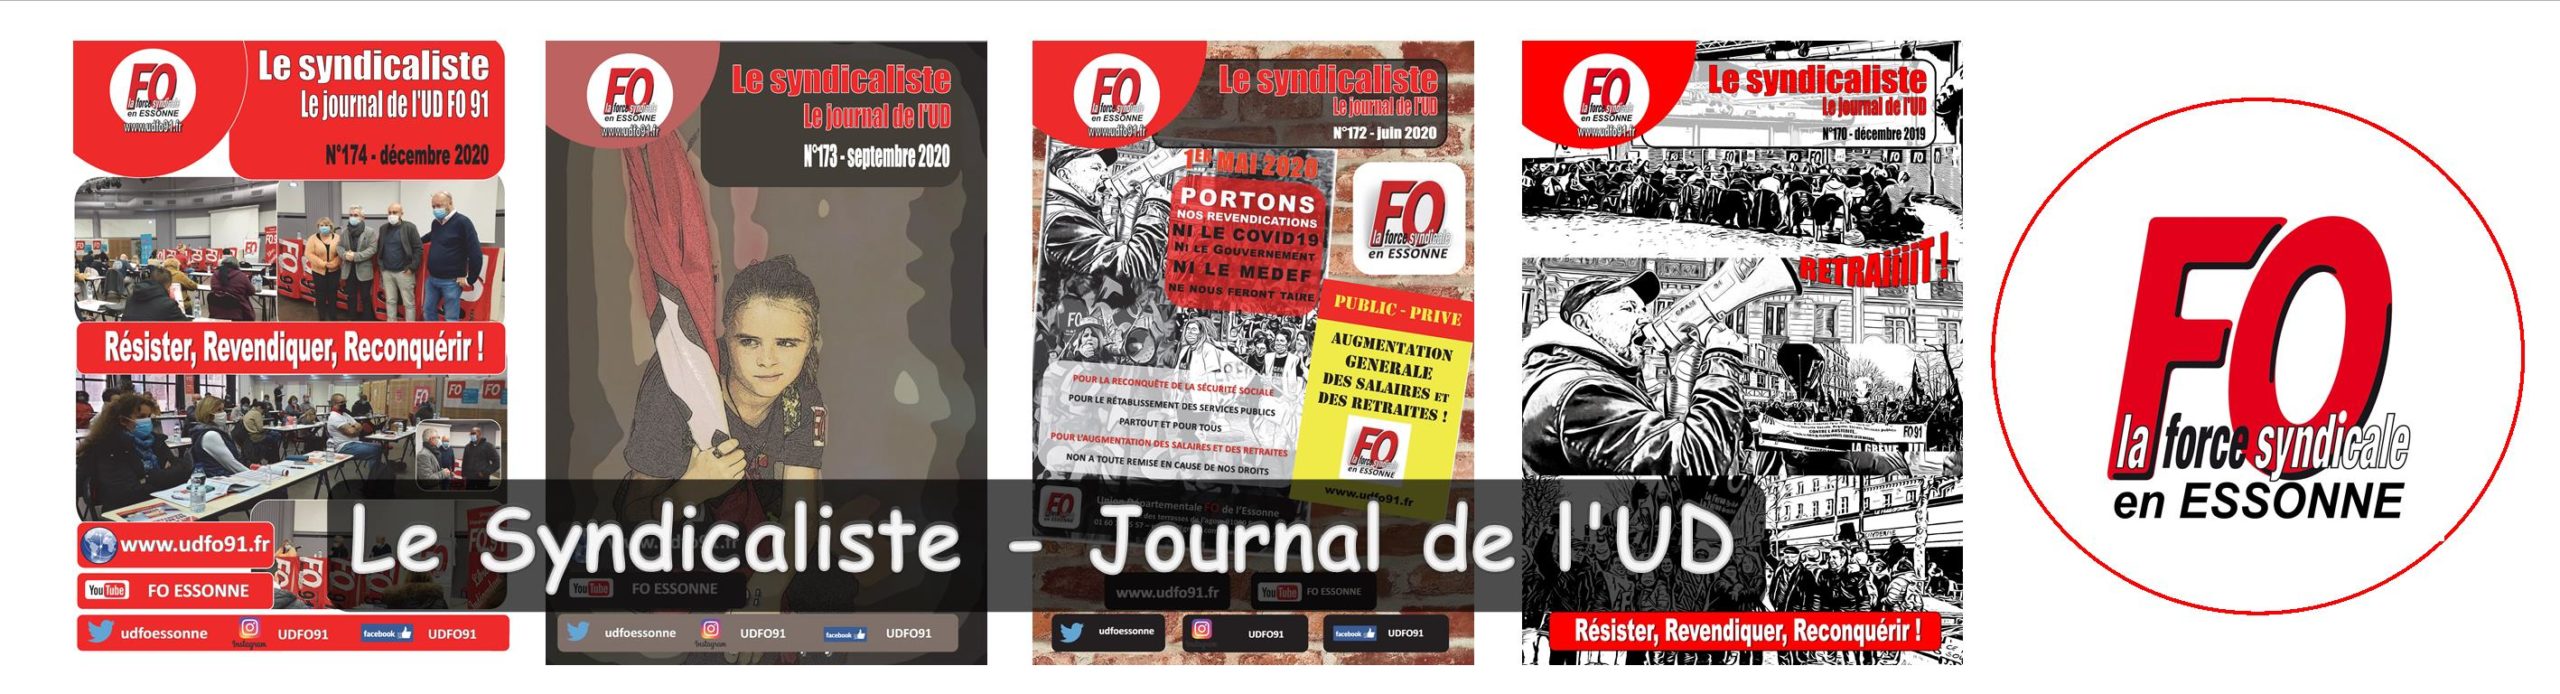 Journal Le Syndicaliste FO 91